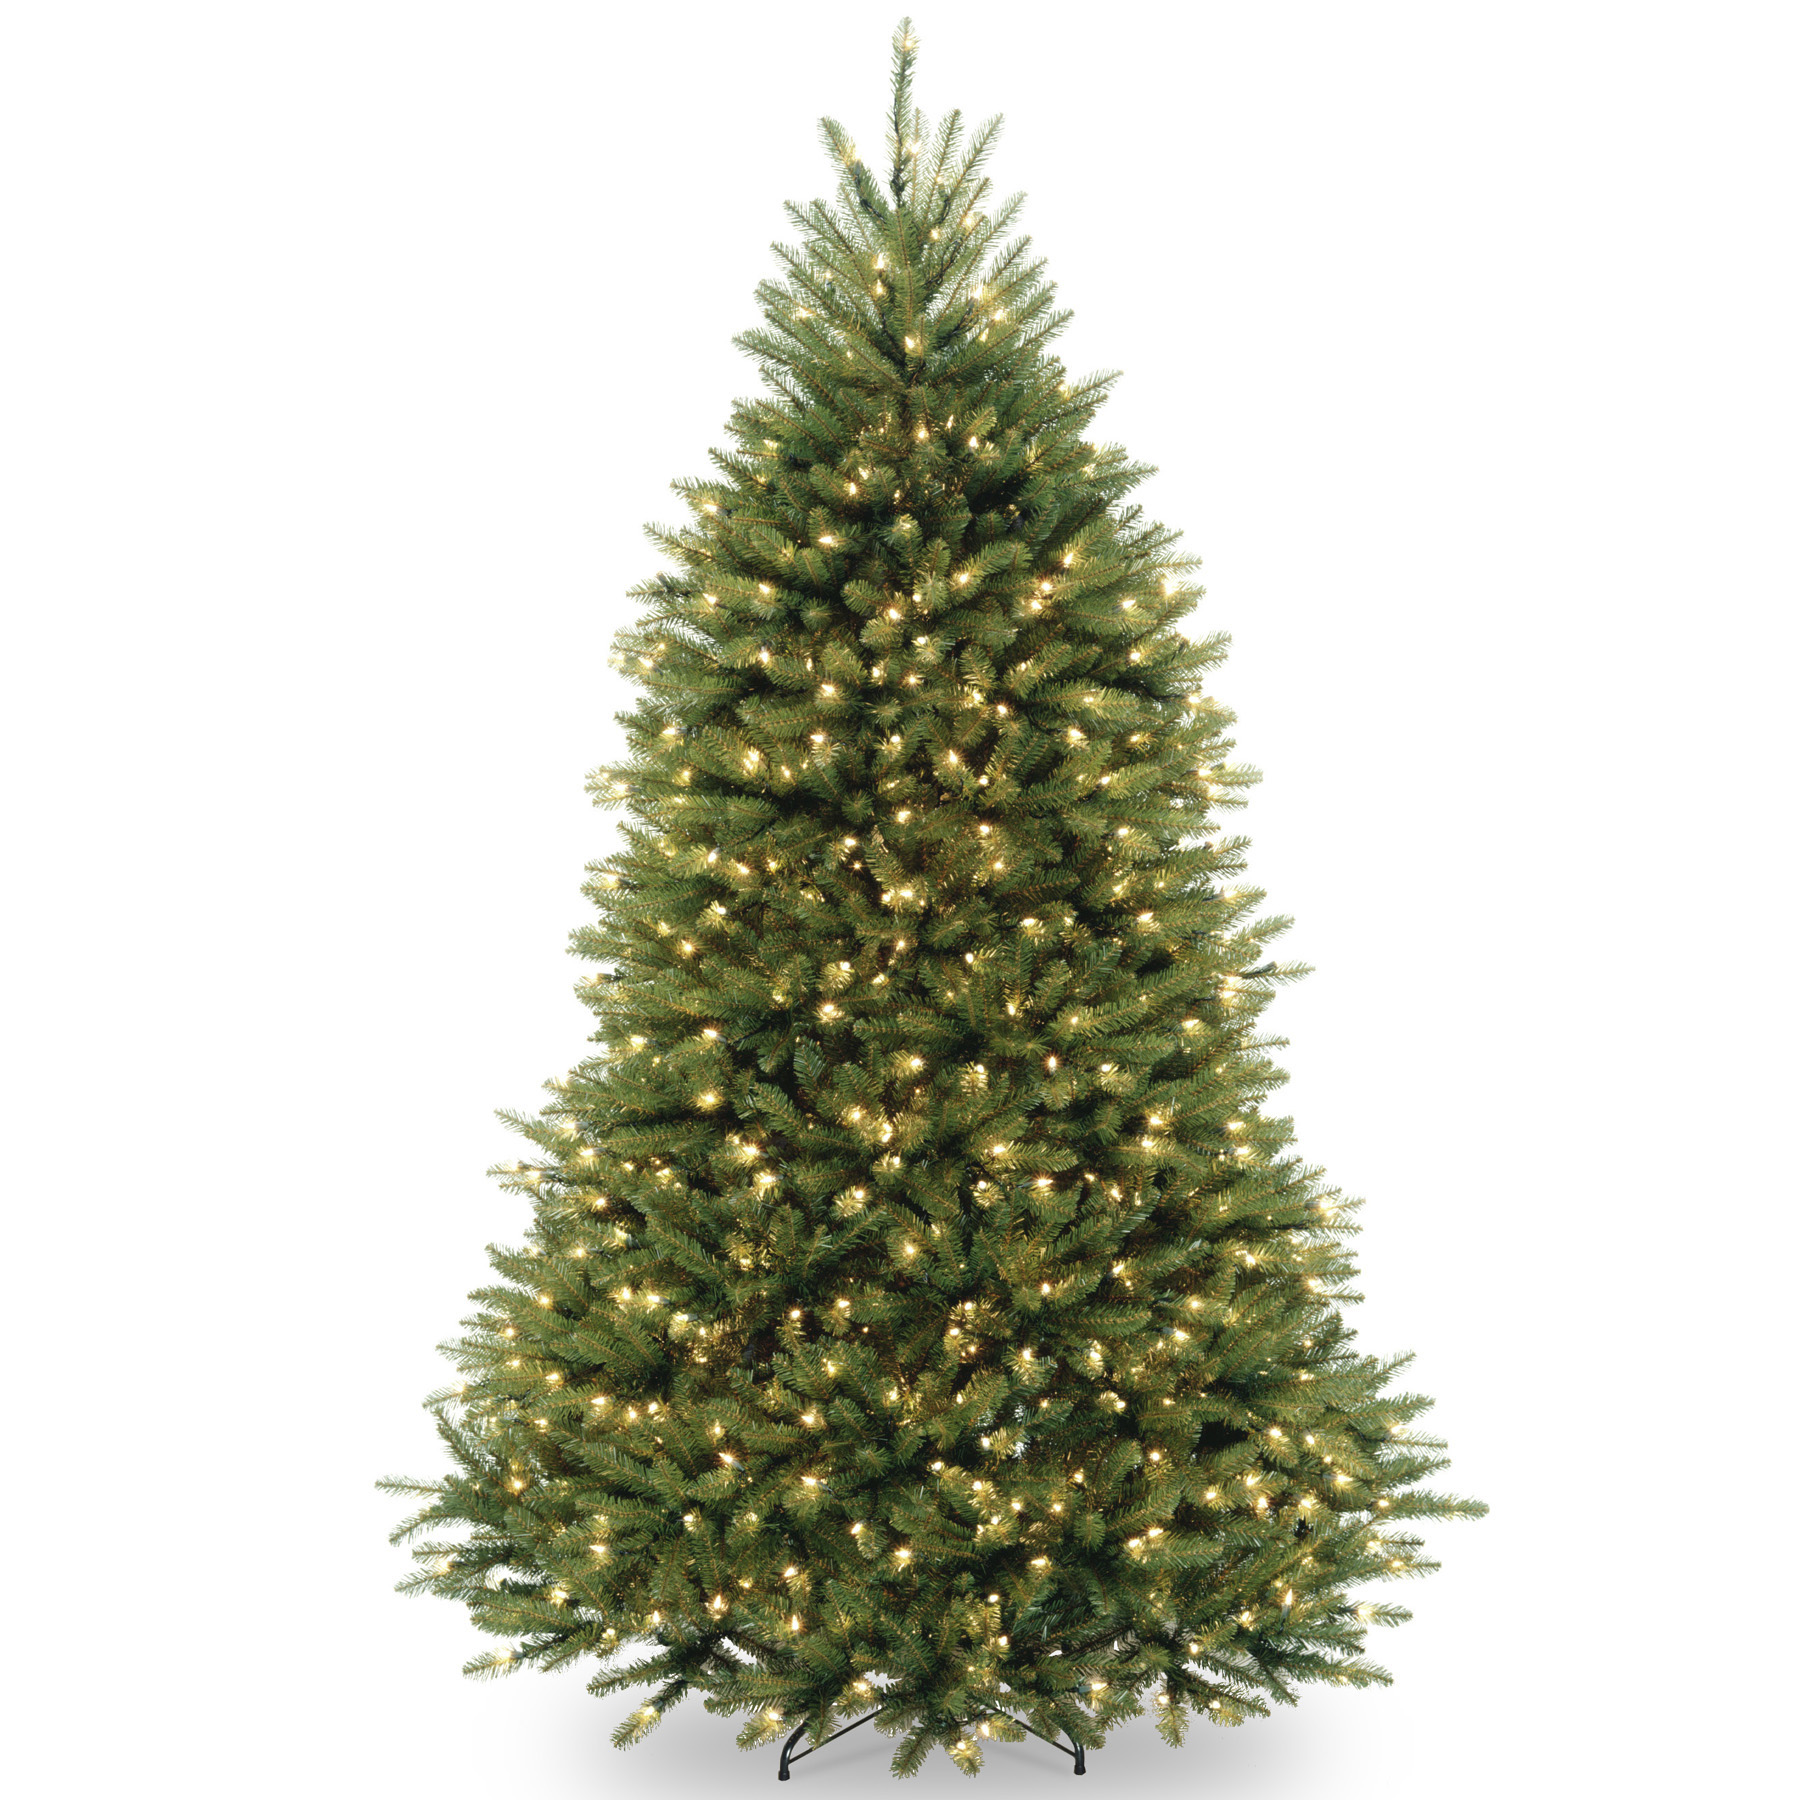 National Tree Company 7 ft. Dunhill Fir Tree with Clear Lights